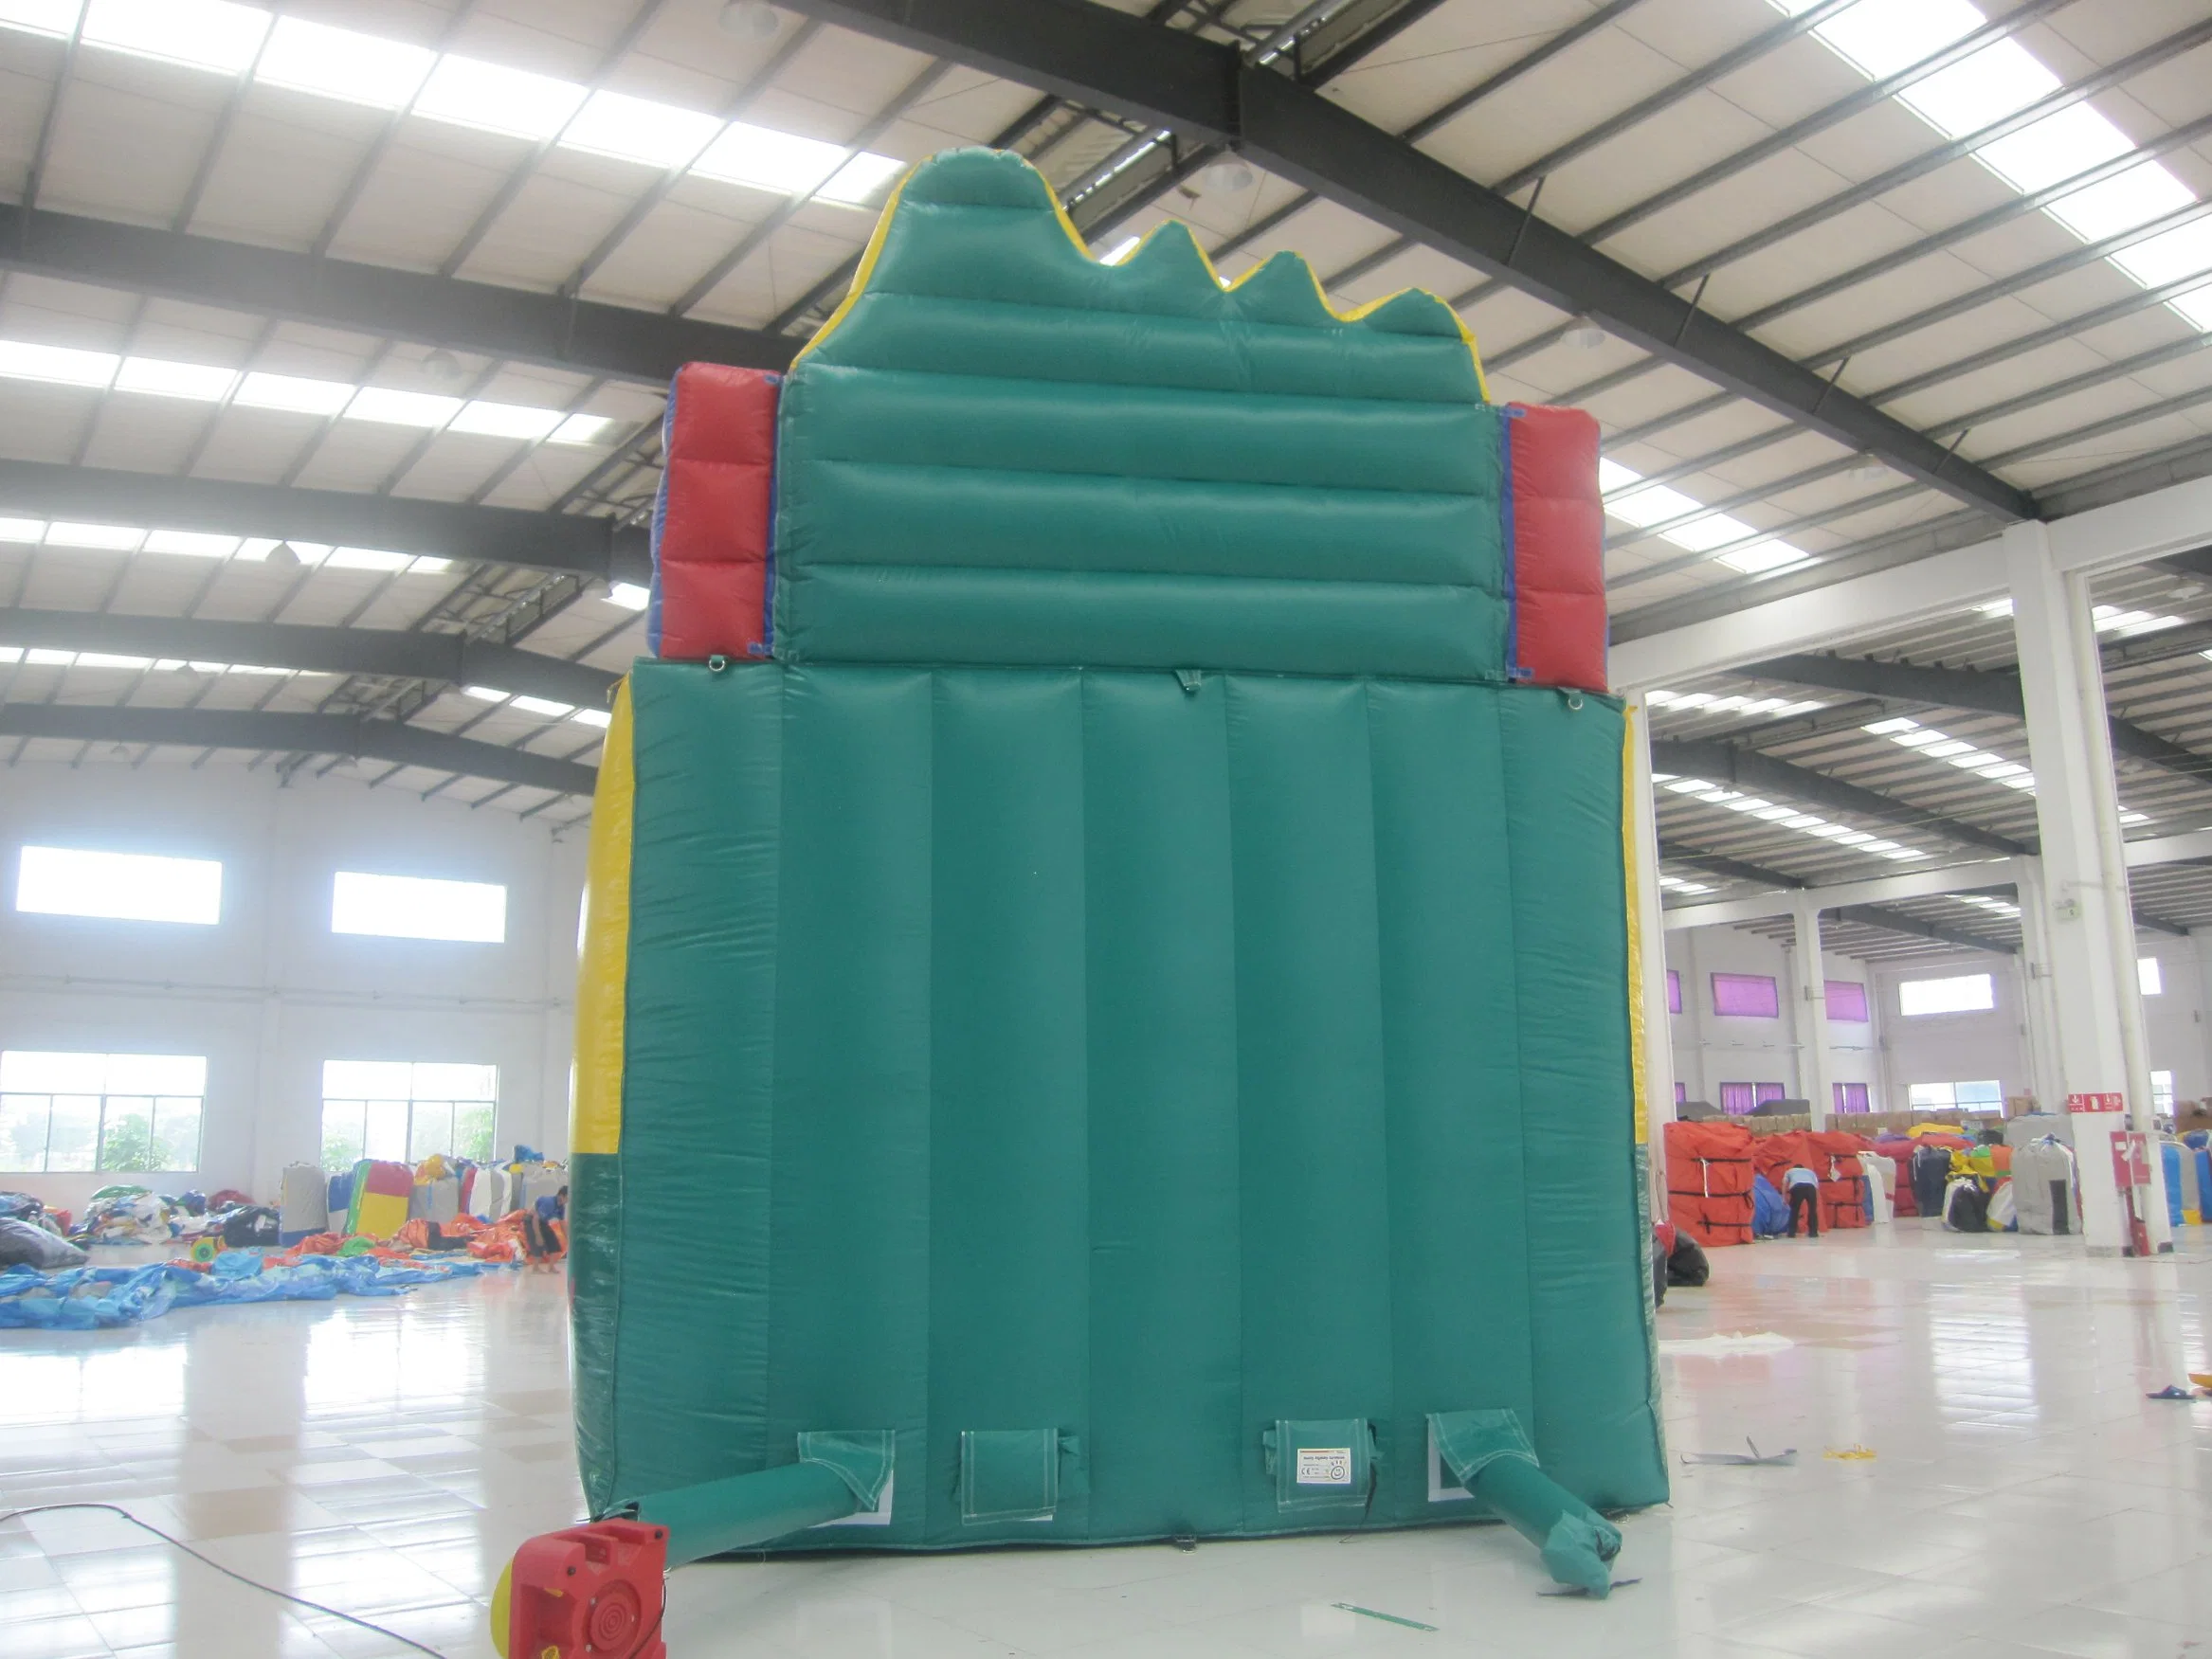 Factory Price Amusement Park Inflatable Slide Jumping Slide Kid Toy (AQ945-2)